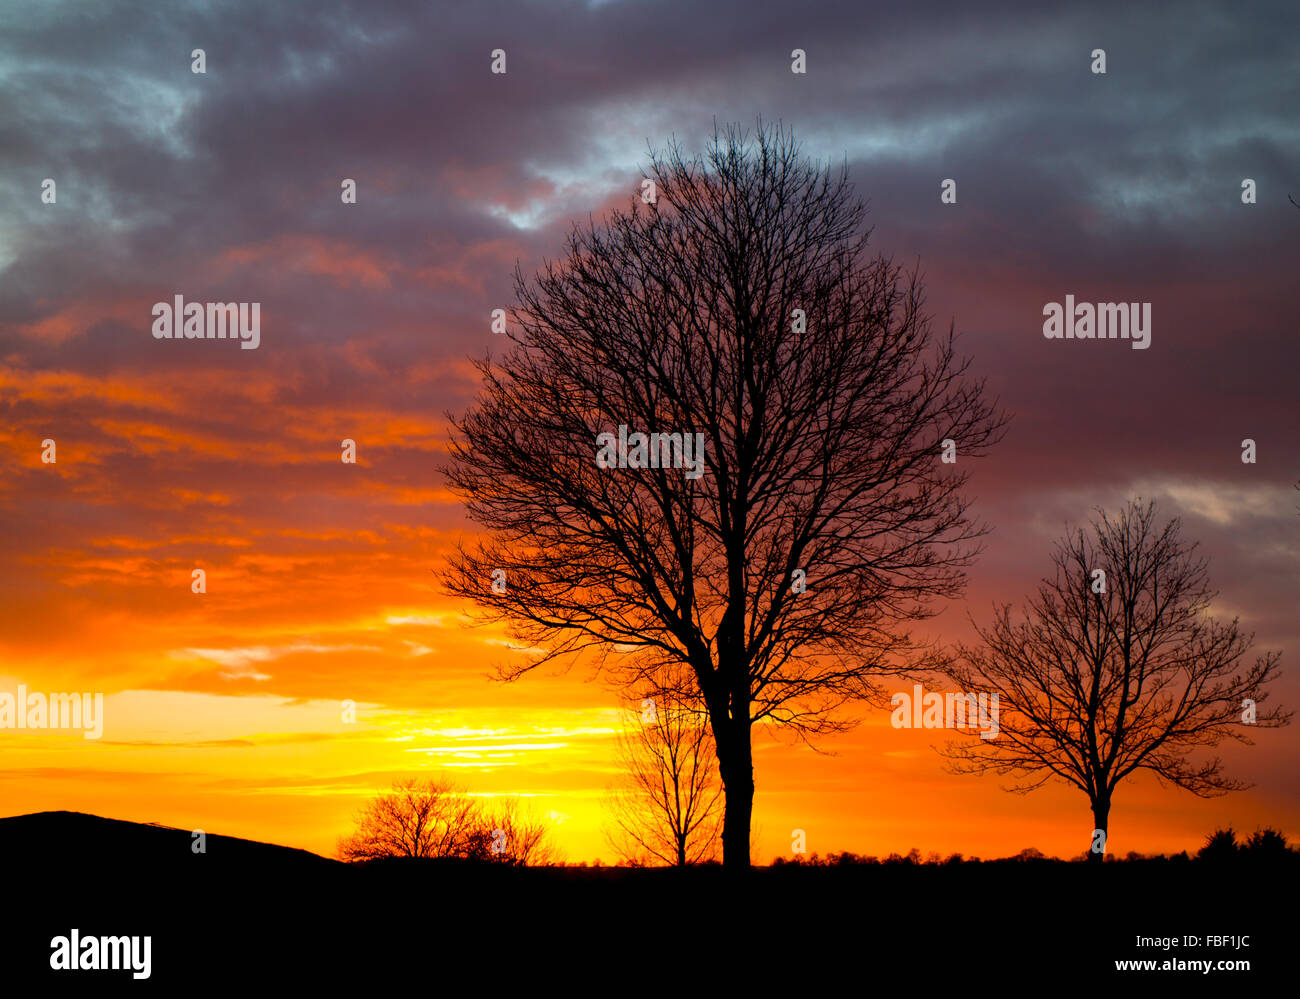 Warwick, Warwickshire, UK. 15th January 2016. UK Weather: A dramatic sunset seen across Warwick racecourse where matting has been laid around the whole course to protect it from overnight frost in preparation for Saturday`s National Hunt race meeting. Credit:  Colin Underhill/Alamy Live News Stock Photo